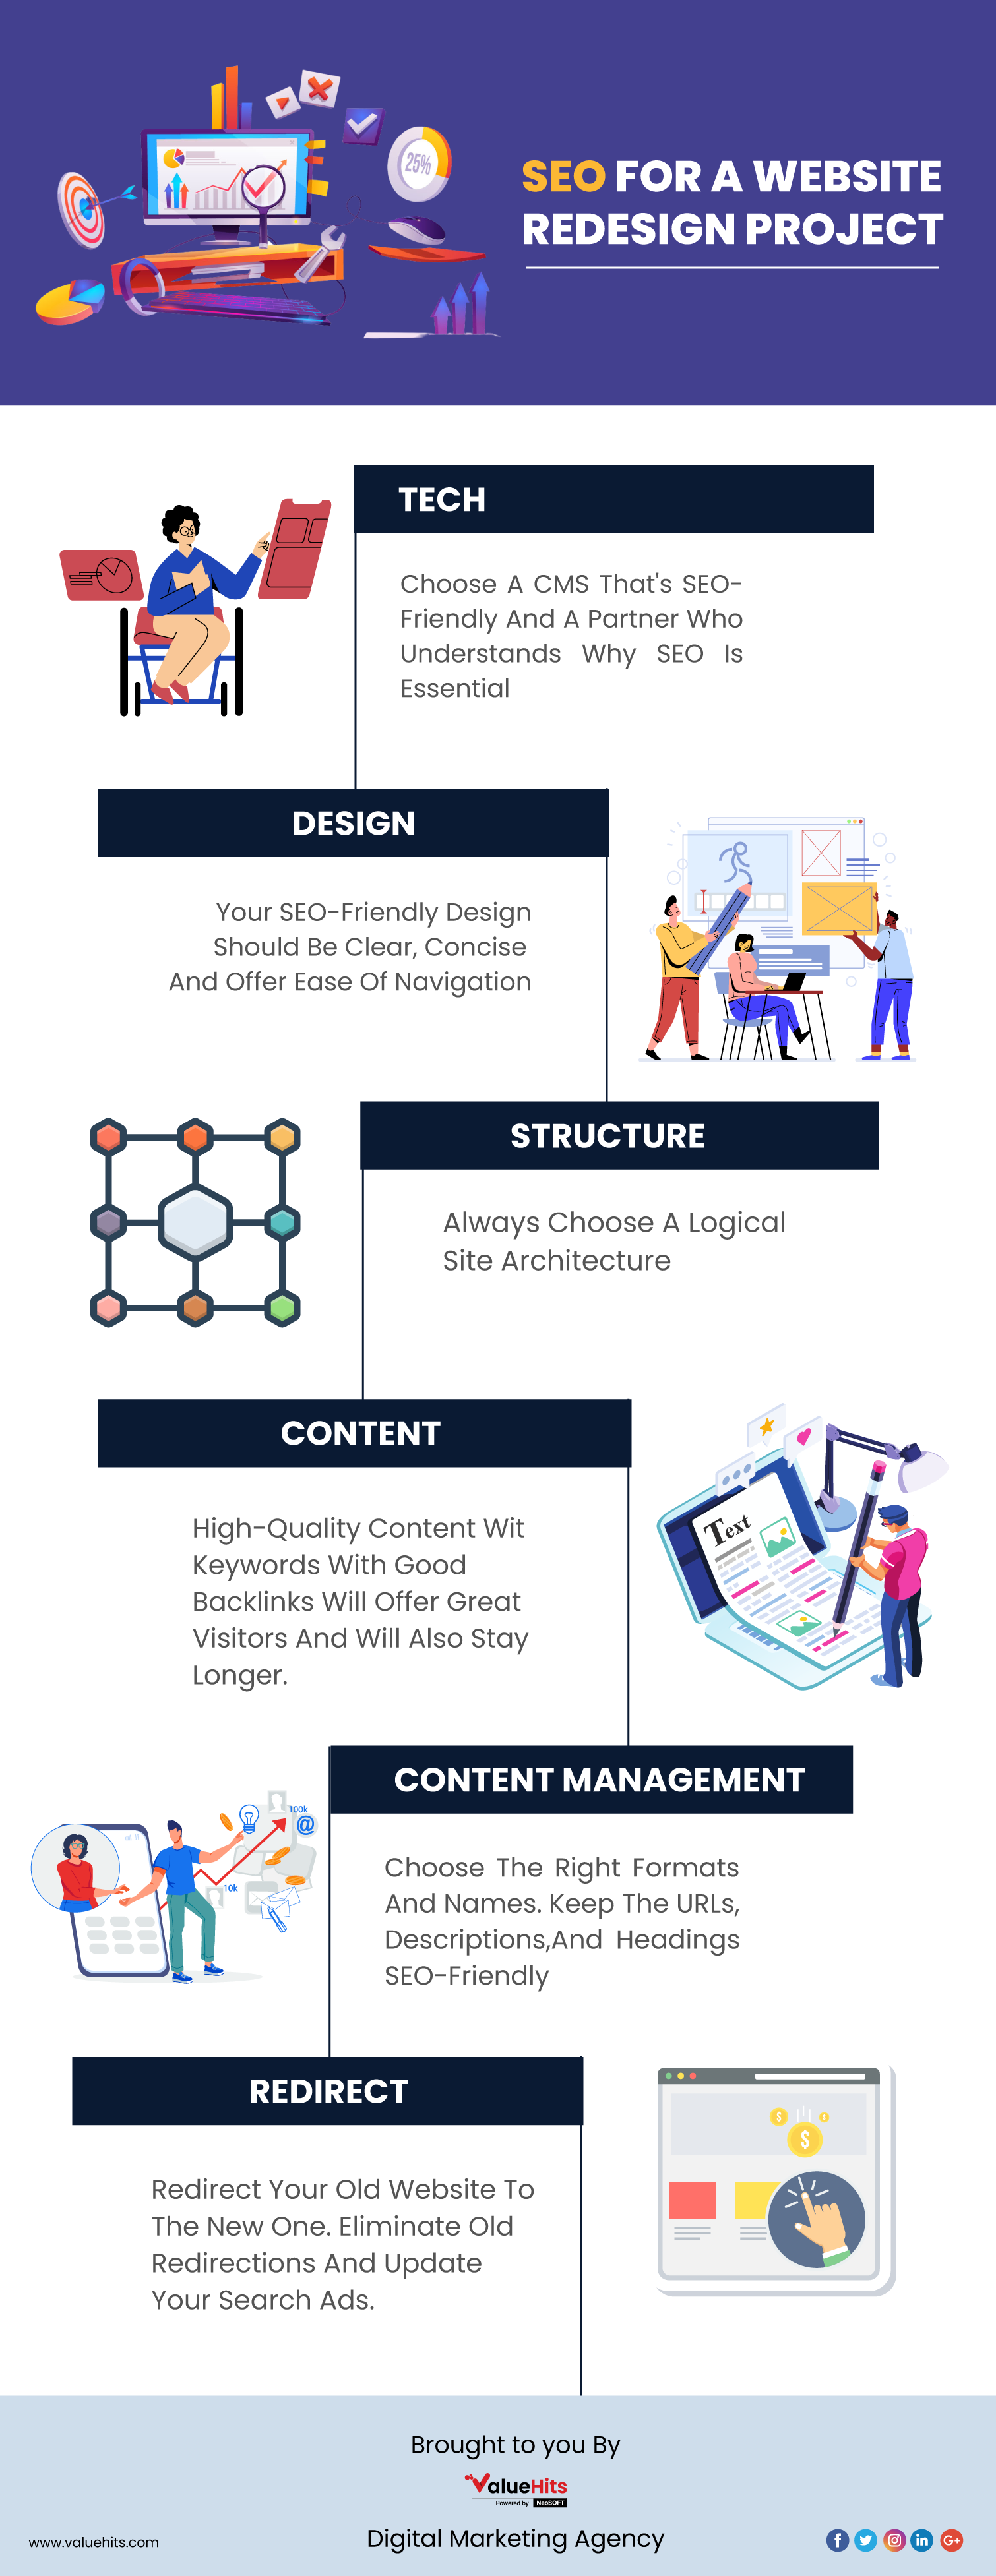 SEO Checklist for Redesigning Your Website